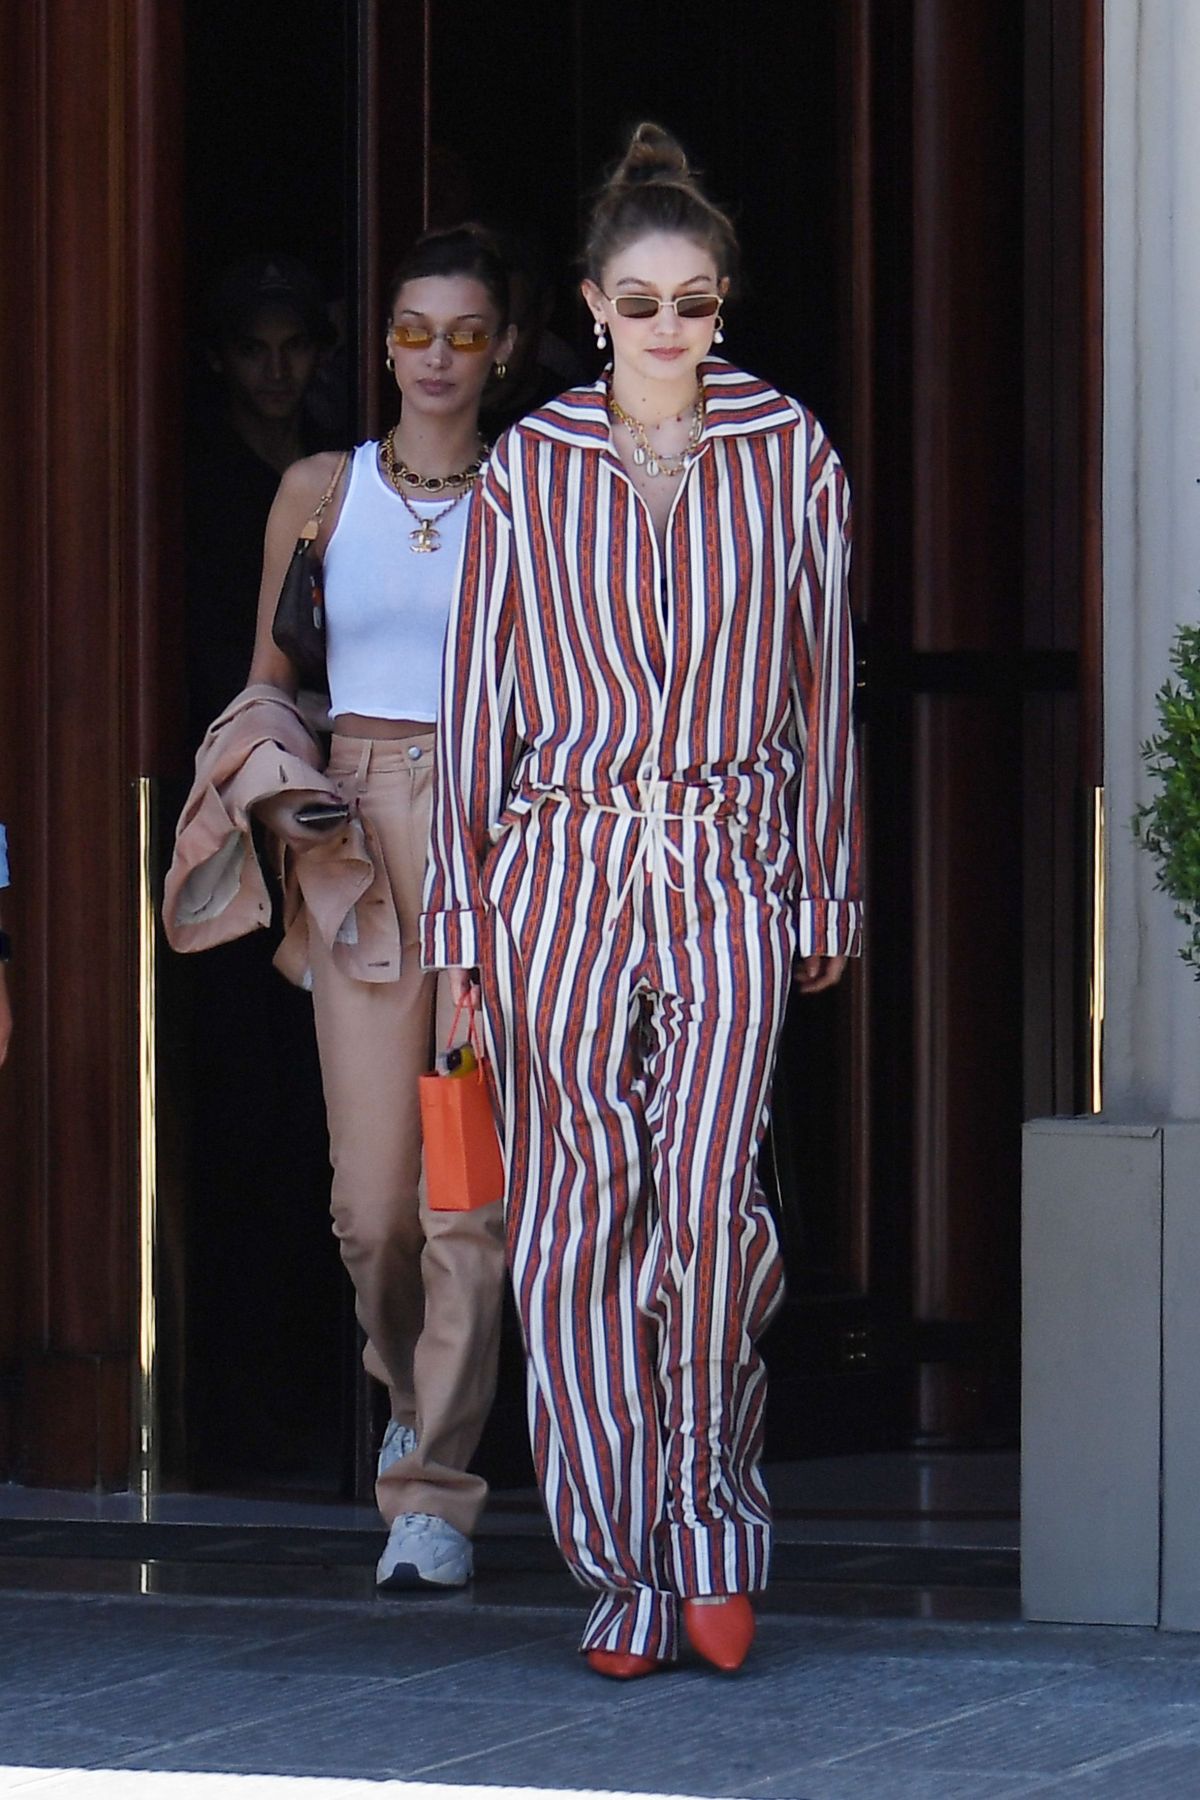 gigi-and-bella-hadid-out-in-florence-06-13-2019-6.jpg